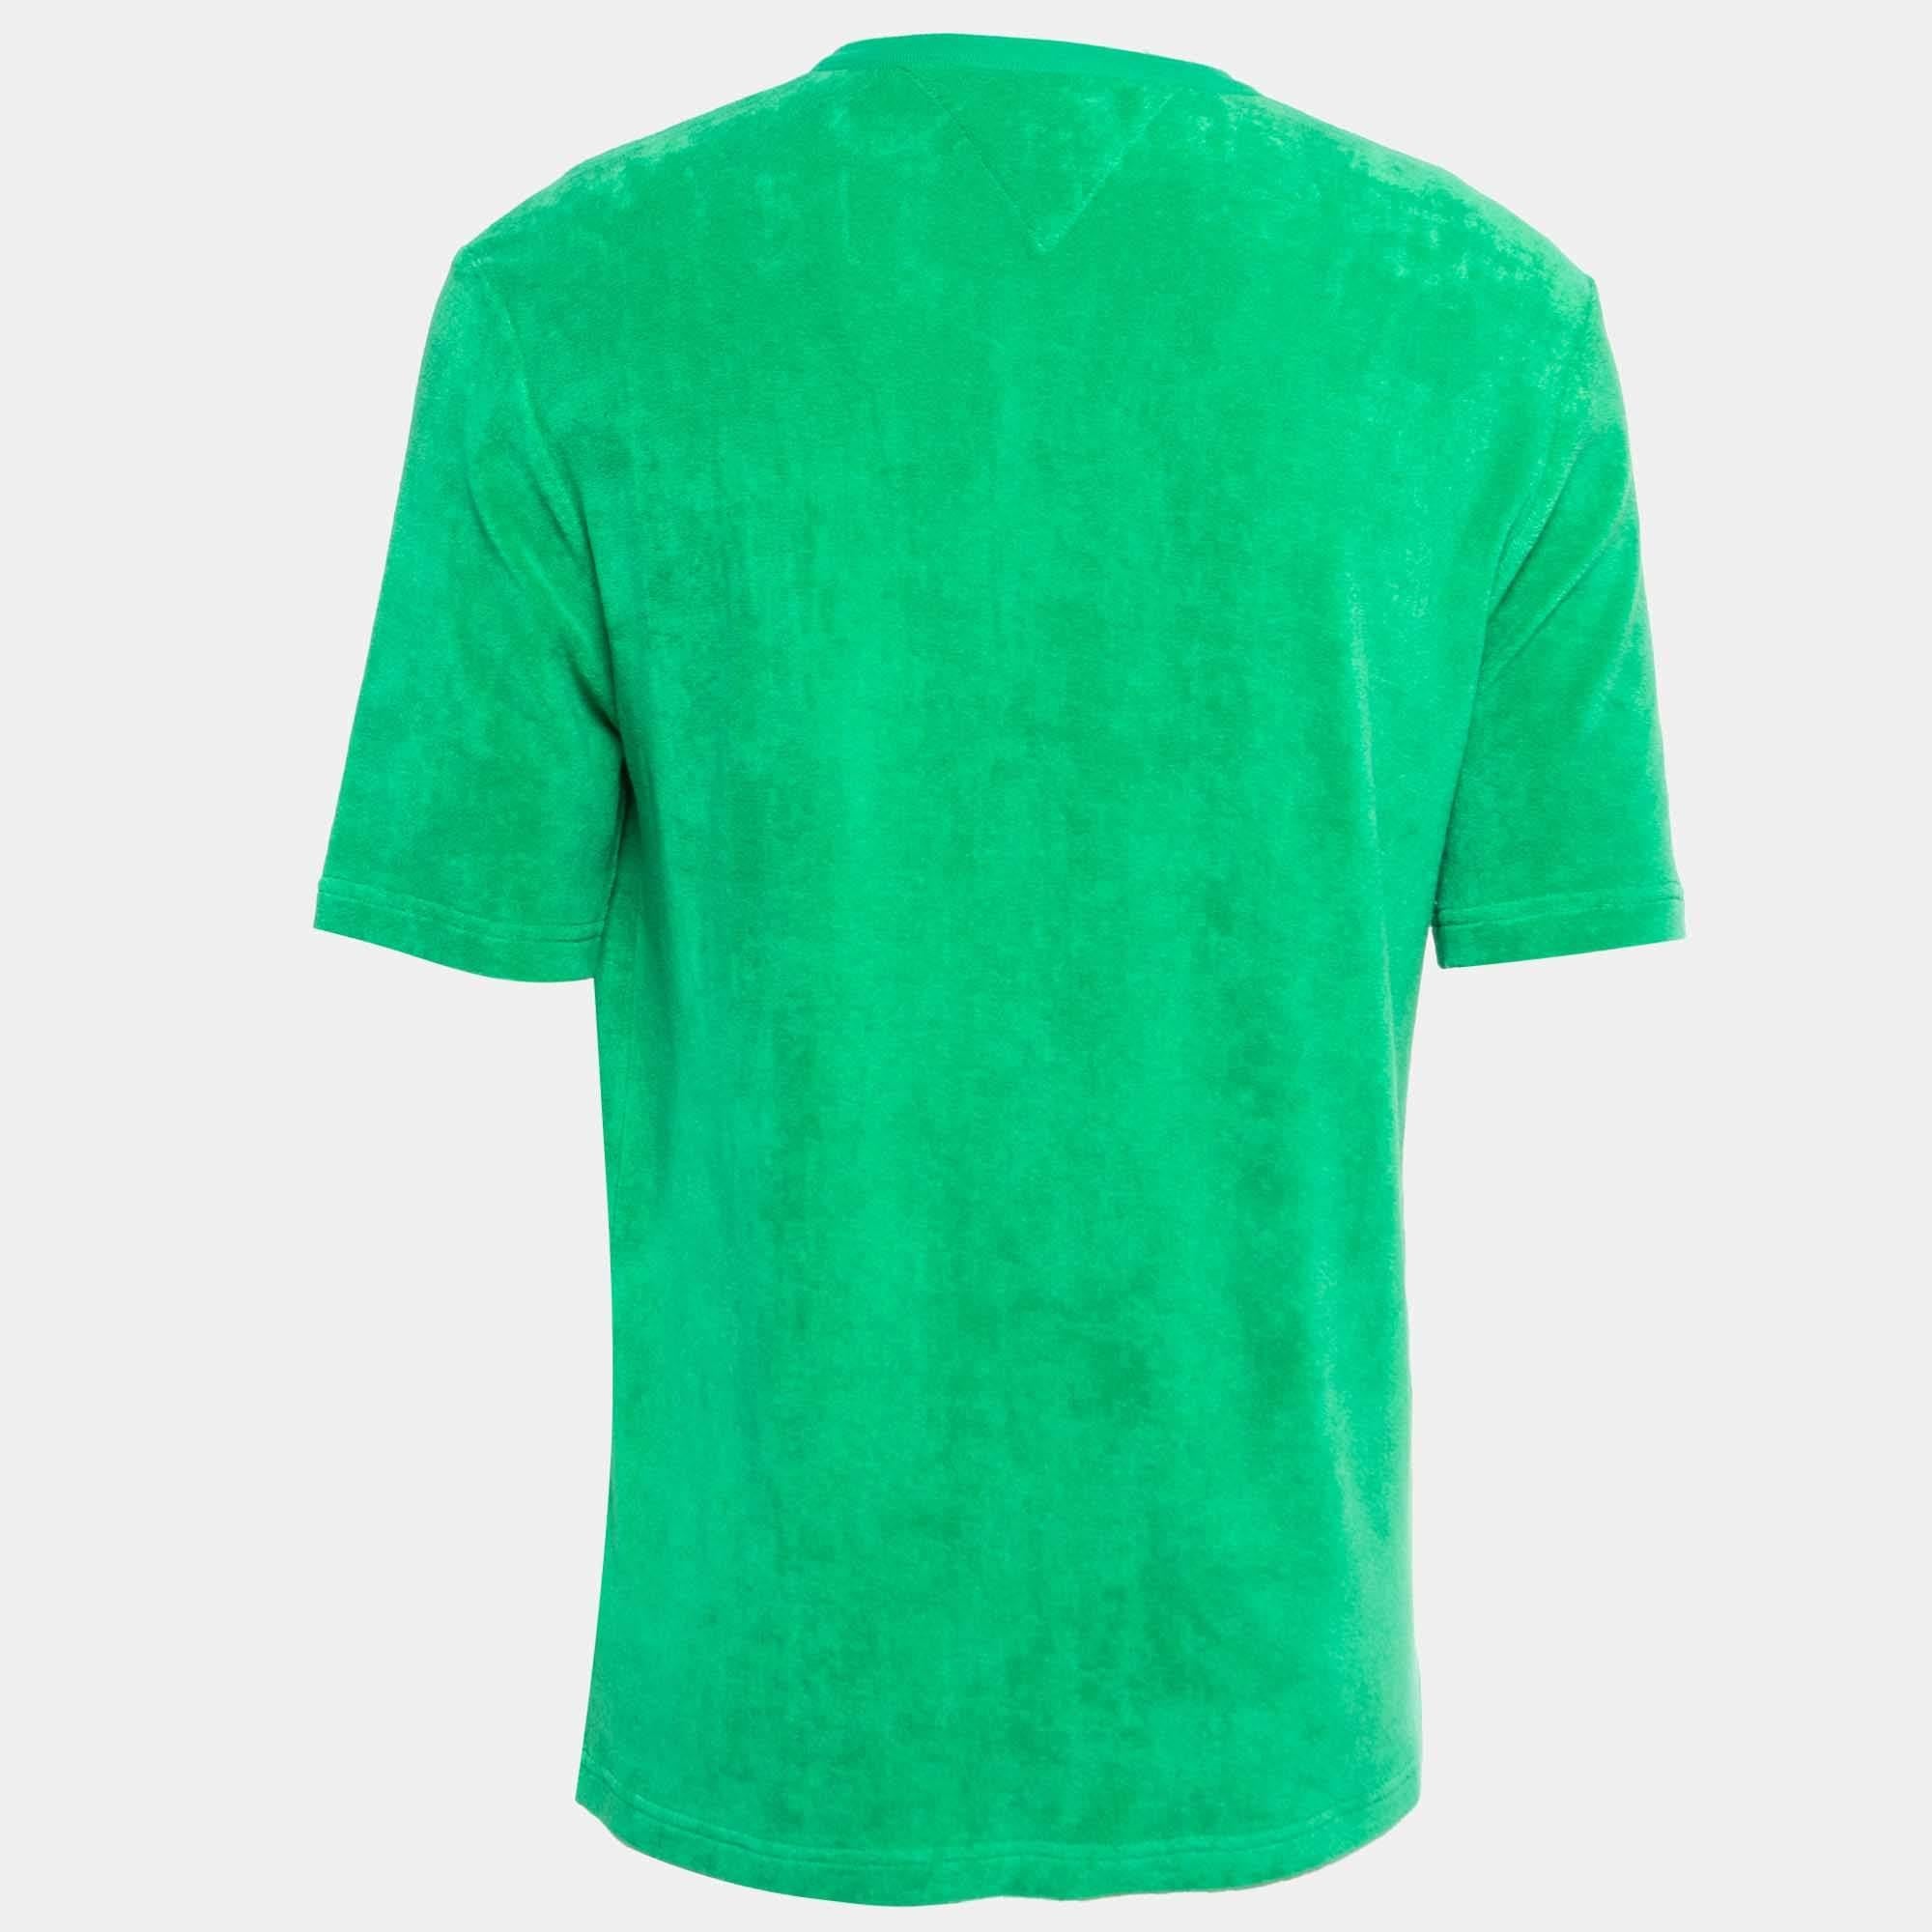 The Bottega Veneta t-shirt is a luxurious fashion staple. Crafted from soft terry cotton, it features a classic crew neck design in an elegant shade of green, offering both comfort and style. Perfect for casual or elevated occasions.

